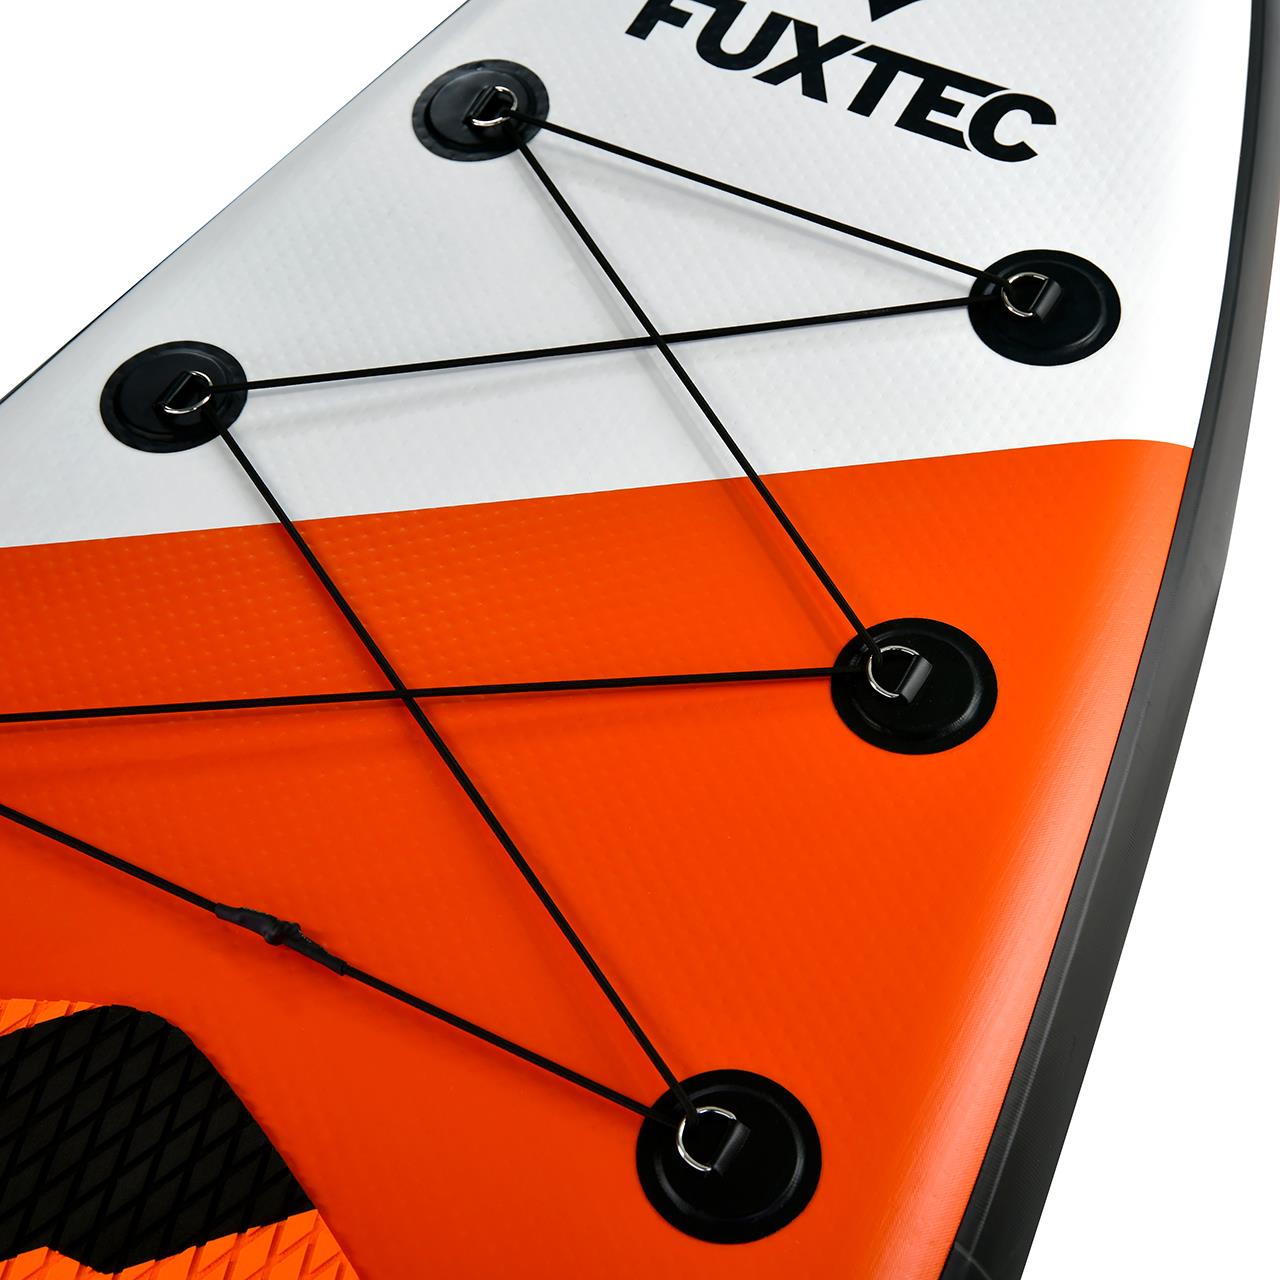 FUXTEC Stand Up Paddle Board FX-SUP320D1